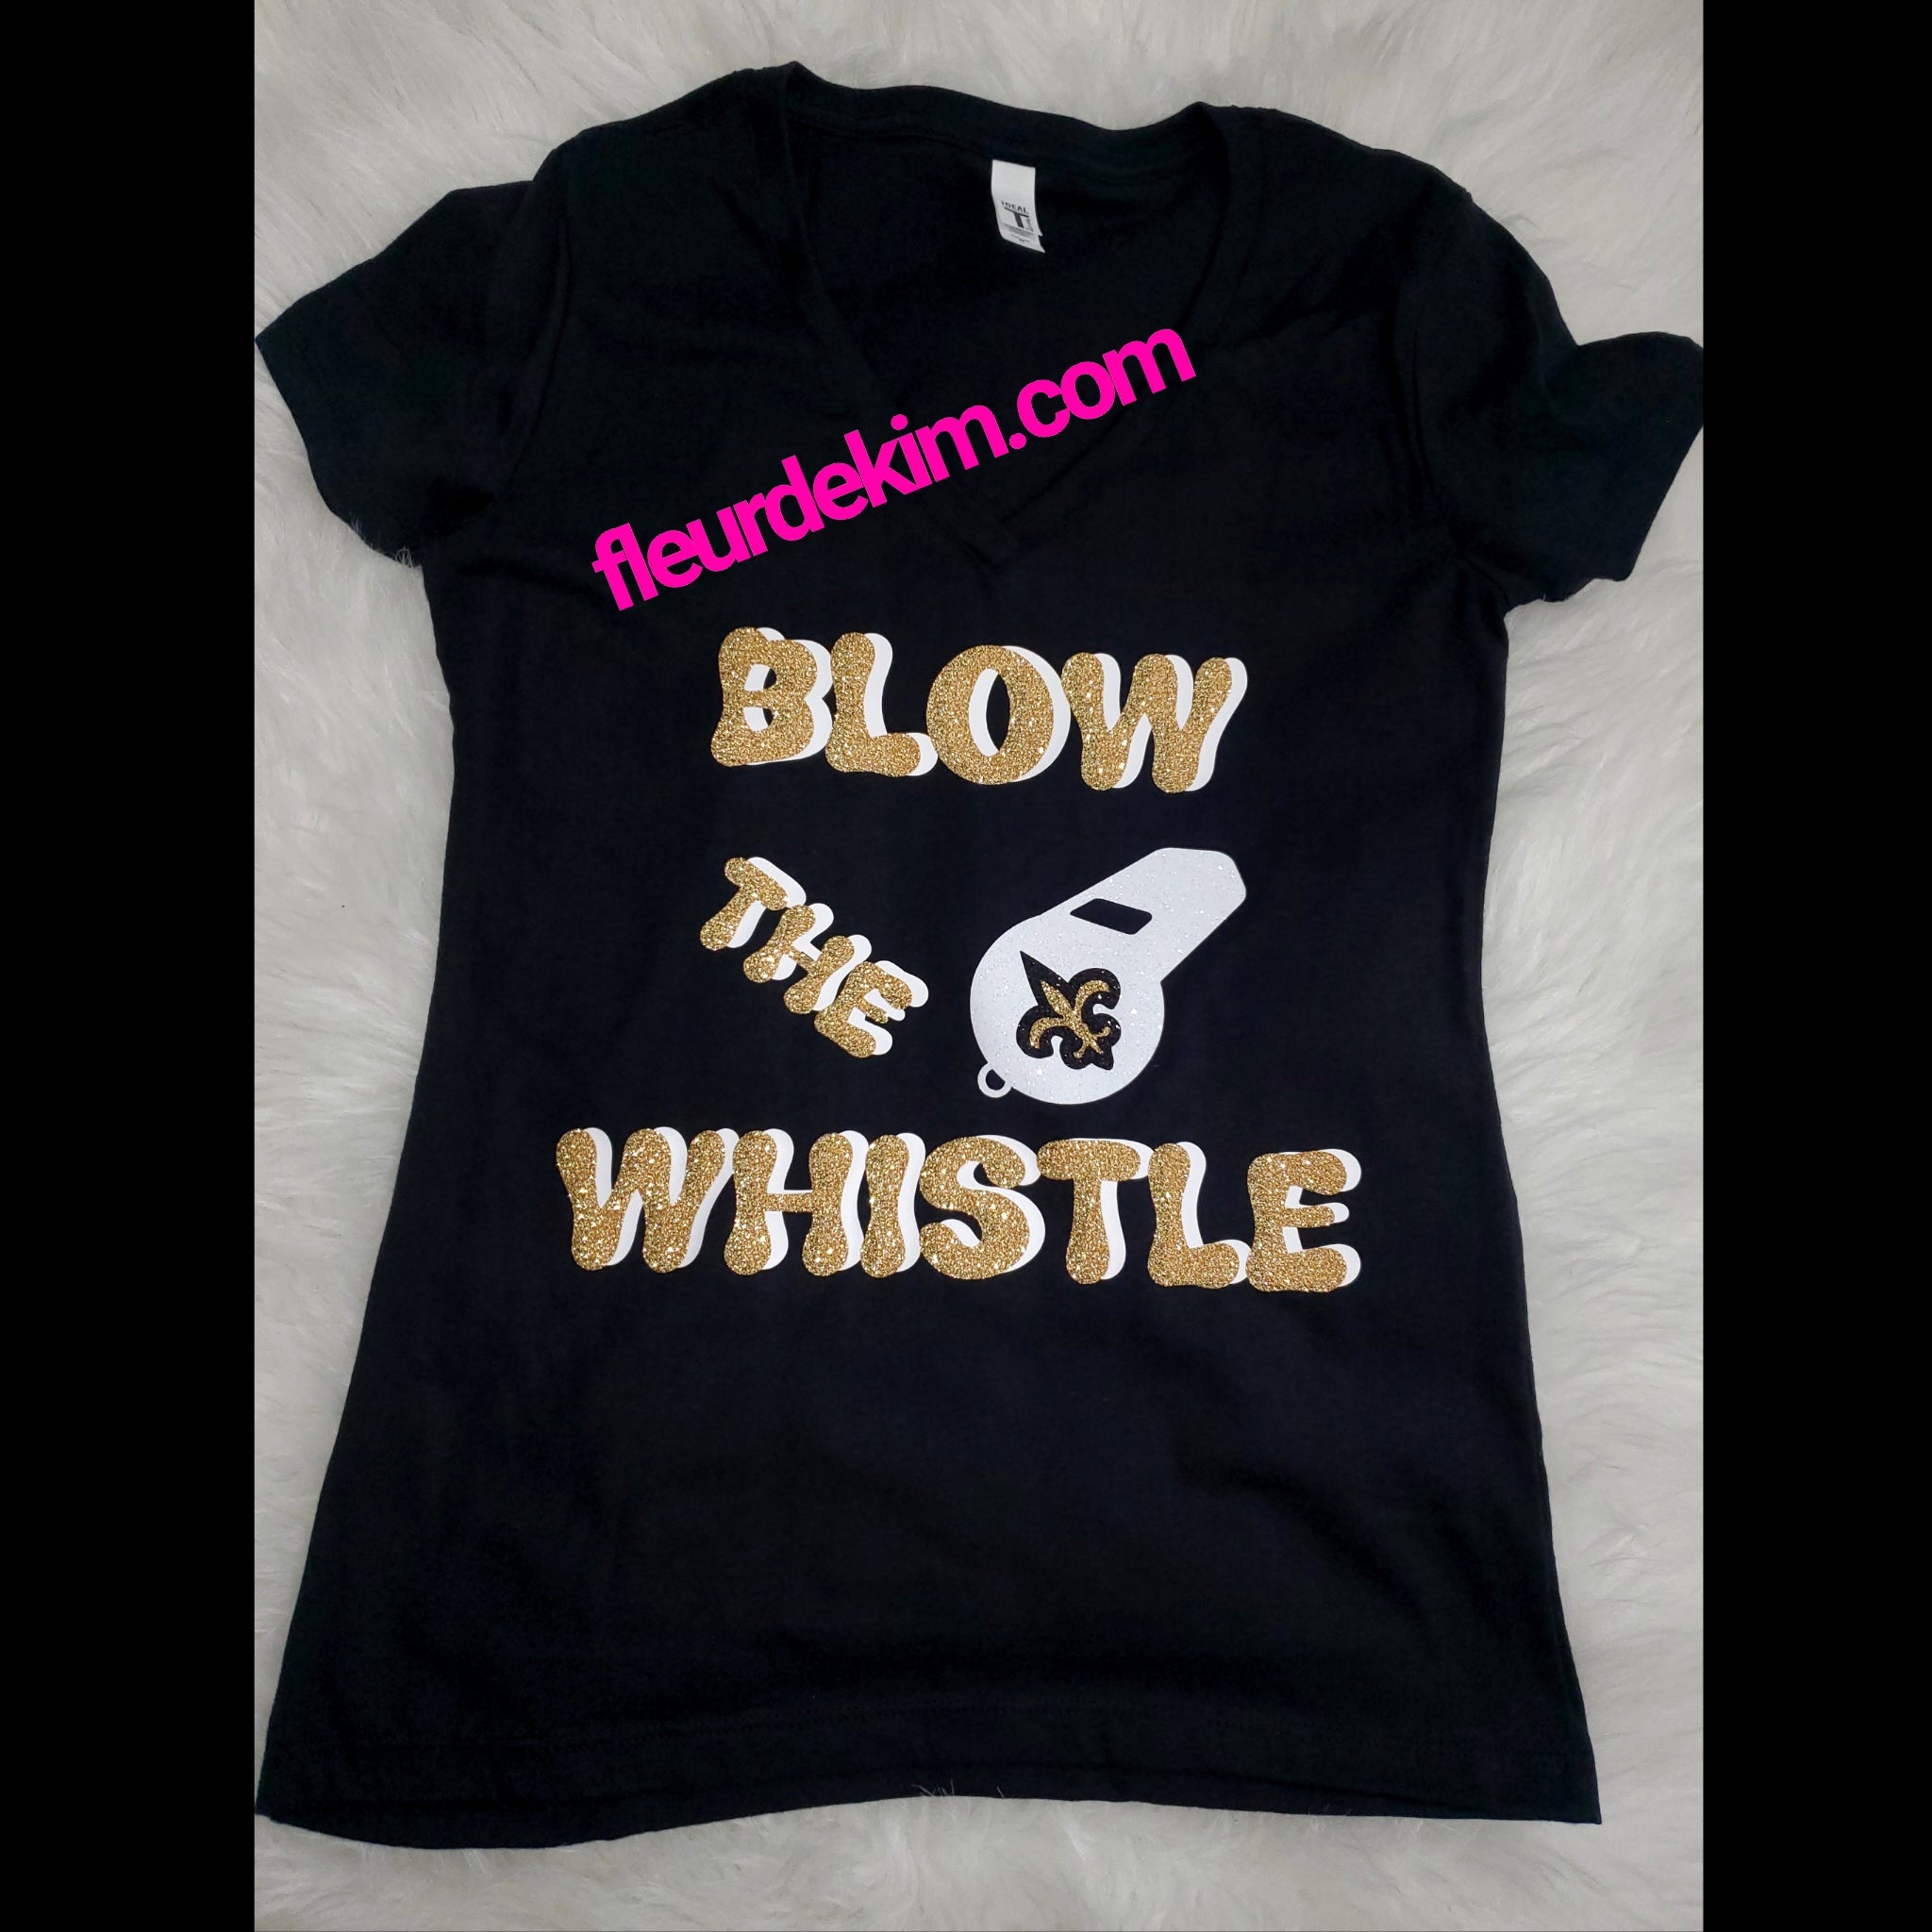 Blow the Whistle tshirt